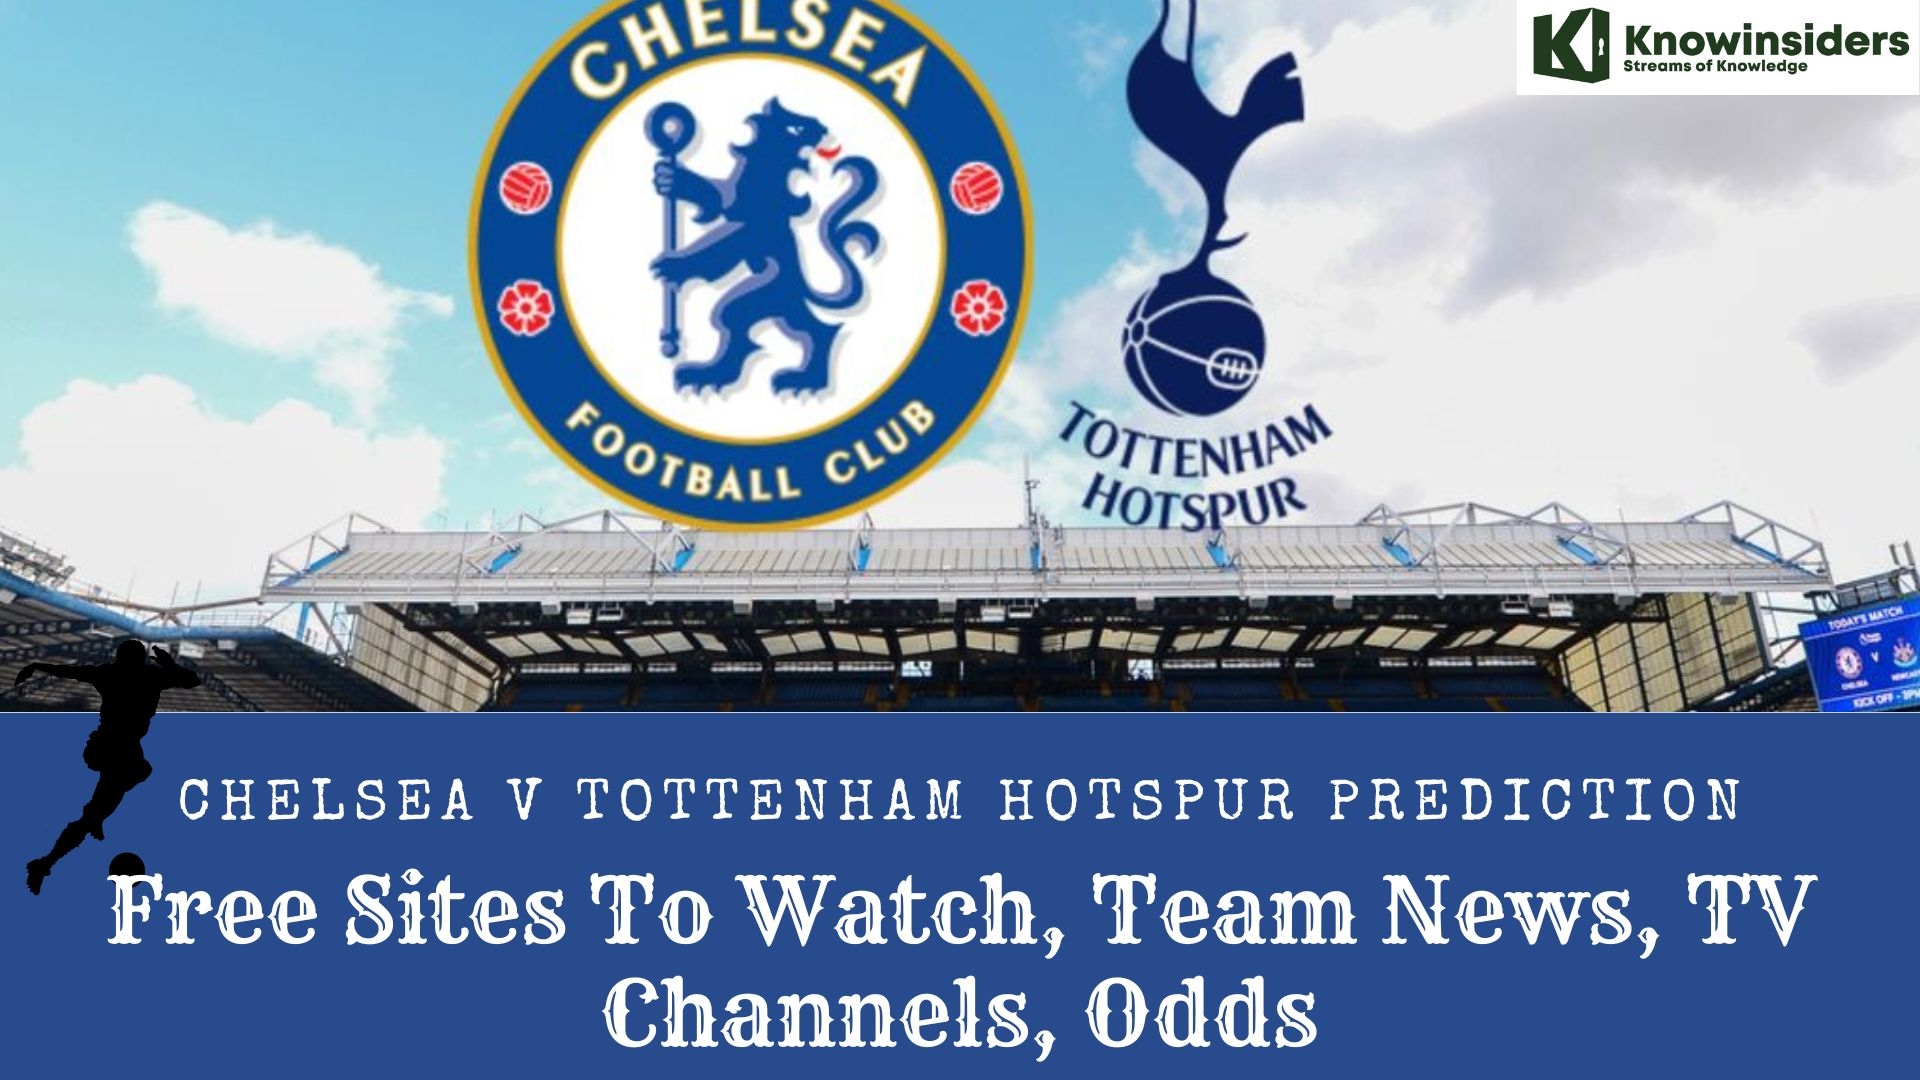 Chelsea v Tottenham Hotspur Prediction: Free Sites To Watch, Team News, TV Channels, Odds Knowinsiders.com 